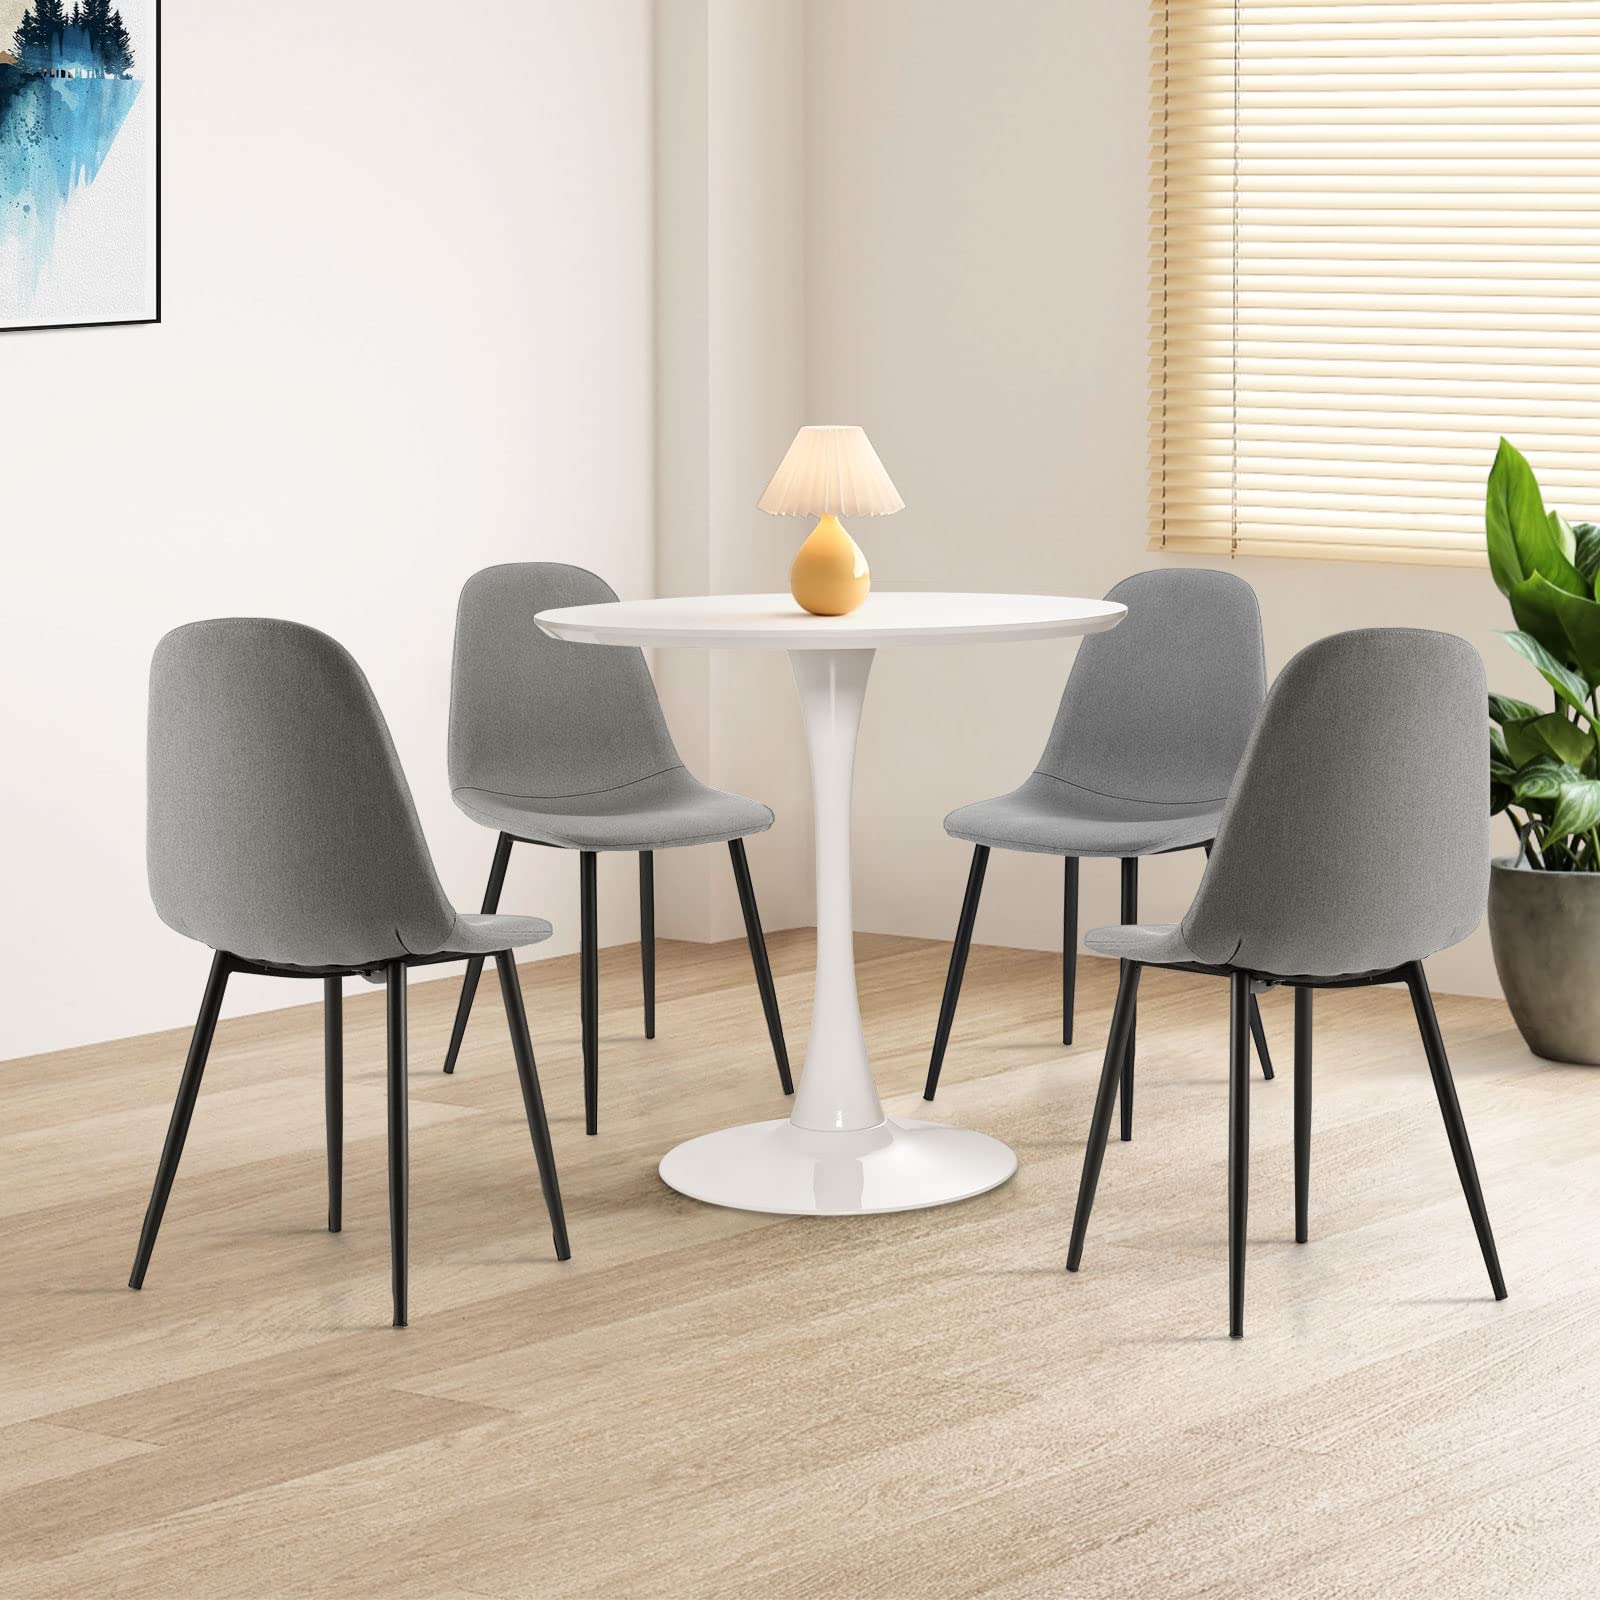 Giantex Round Dining Table